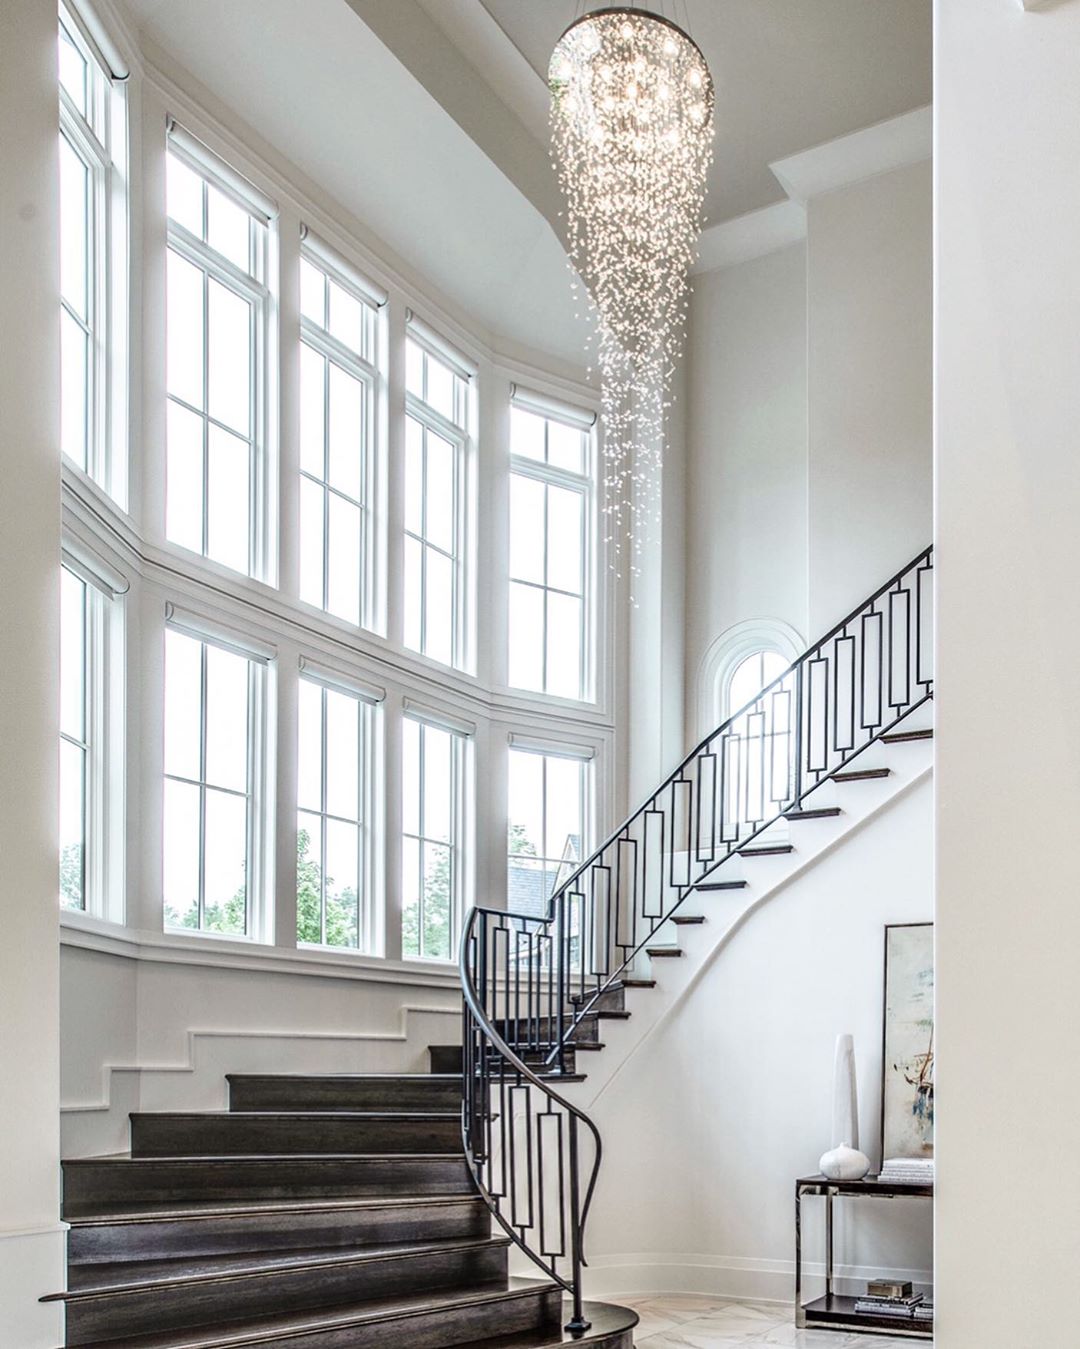 grand staircase overlooking two rows of white fixed windows bringing in natural light